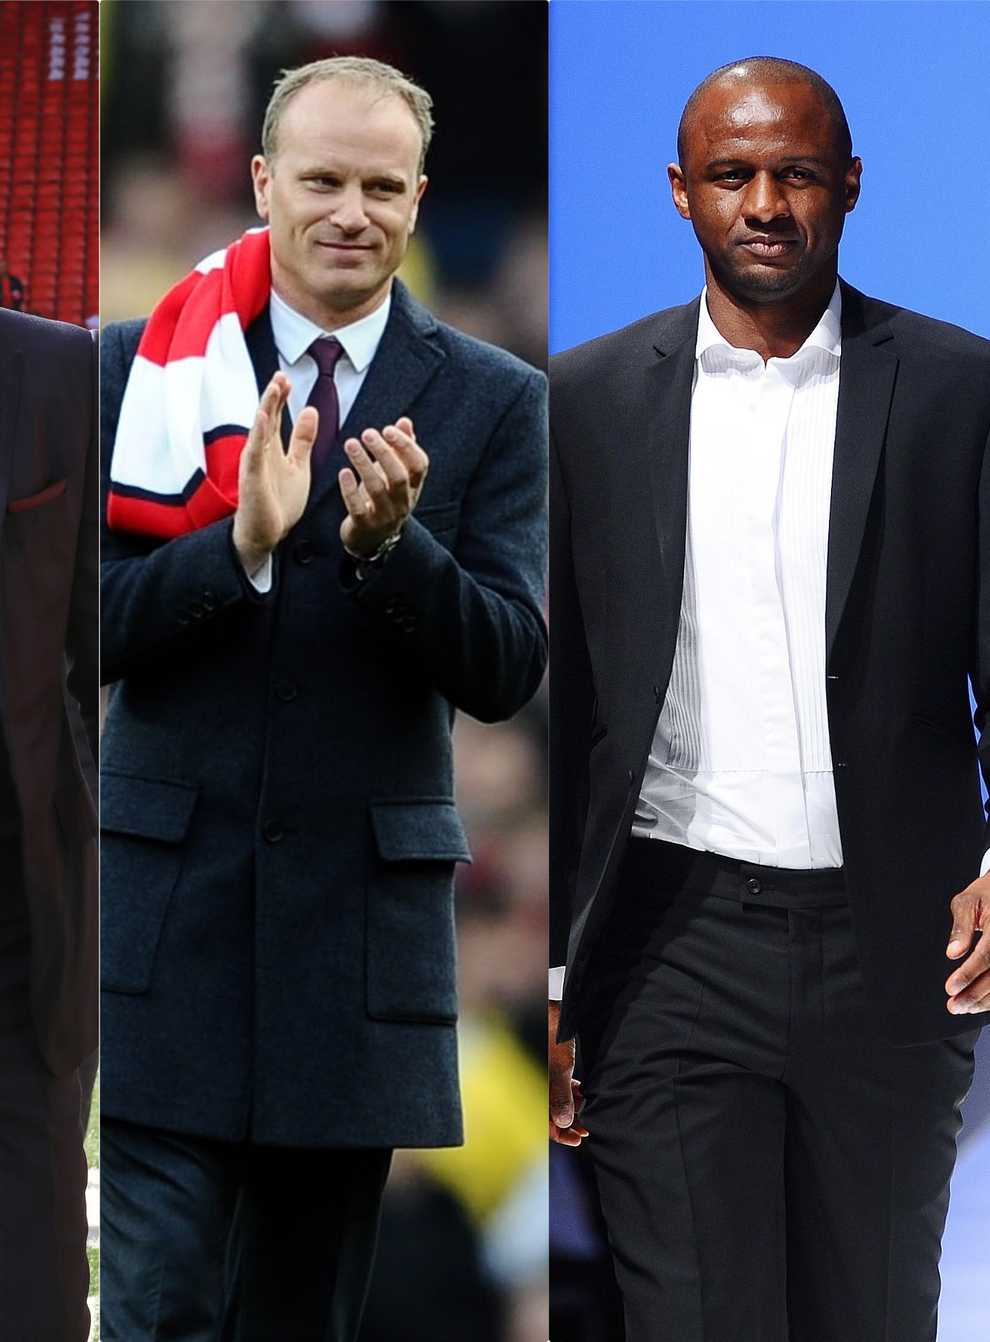 Thierry Henry, Dennis Bergkamp and Patrick Vieira have been linked with a takeover attempt of Arsenal.